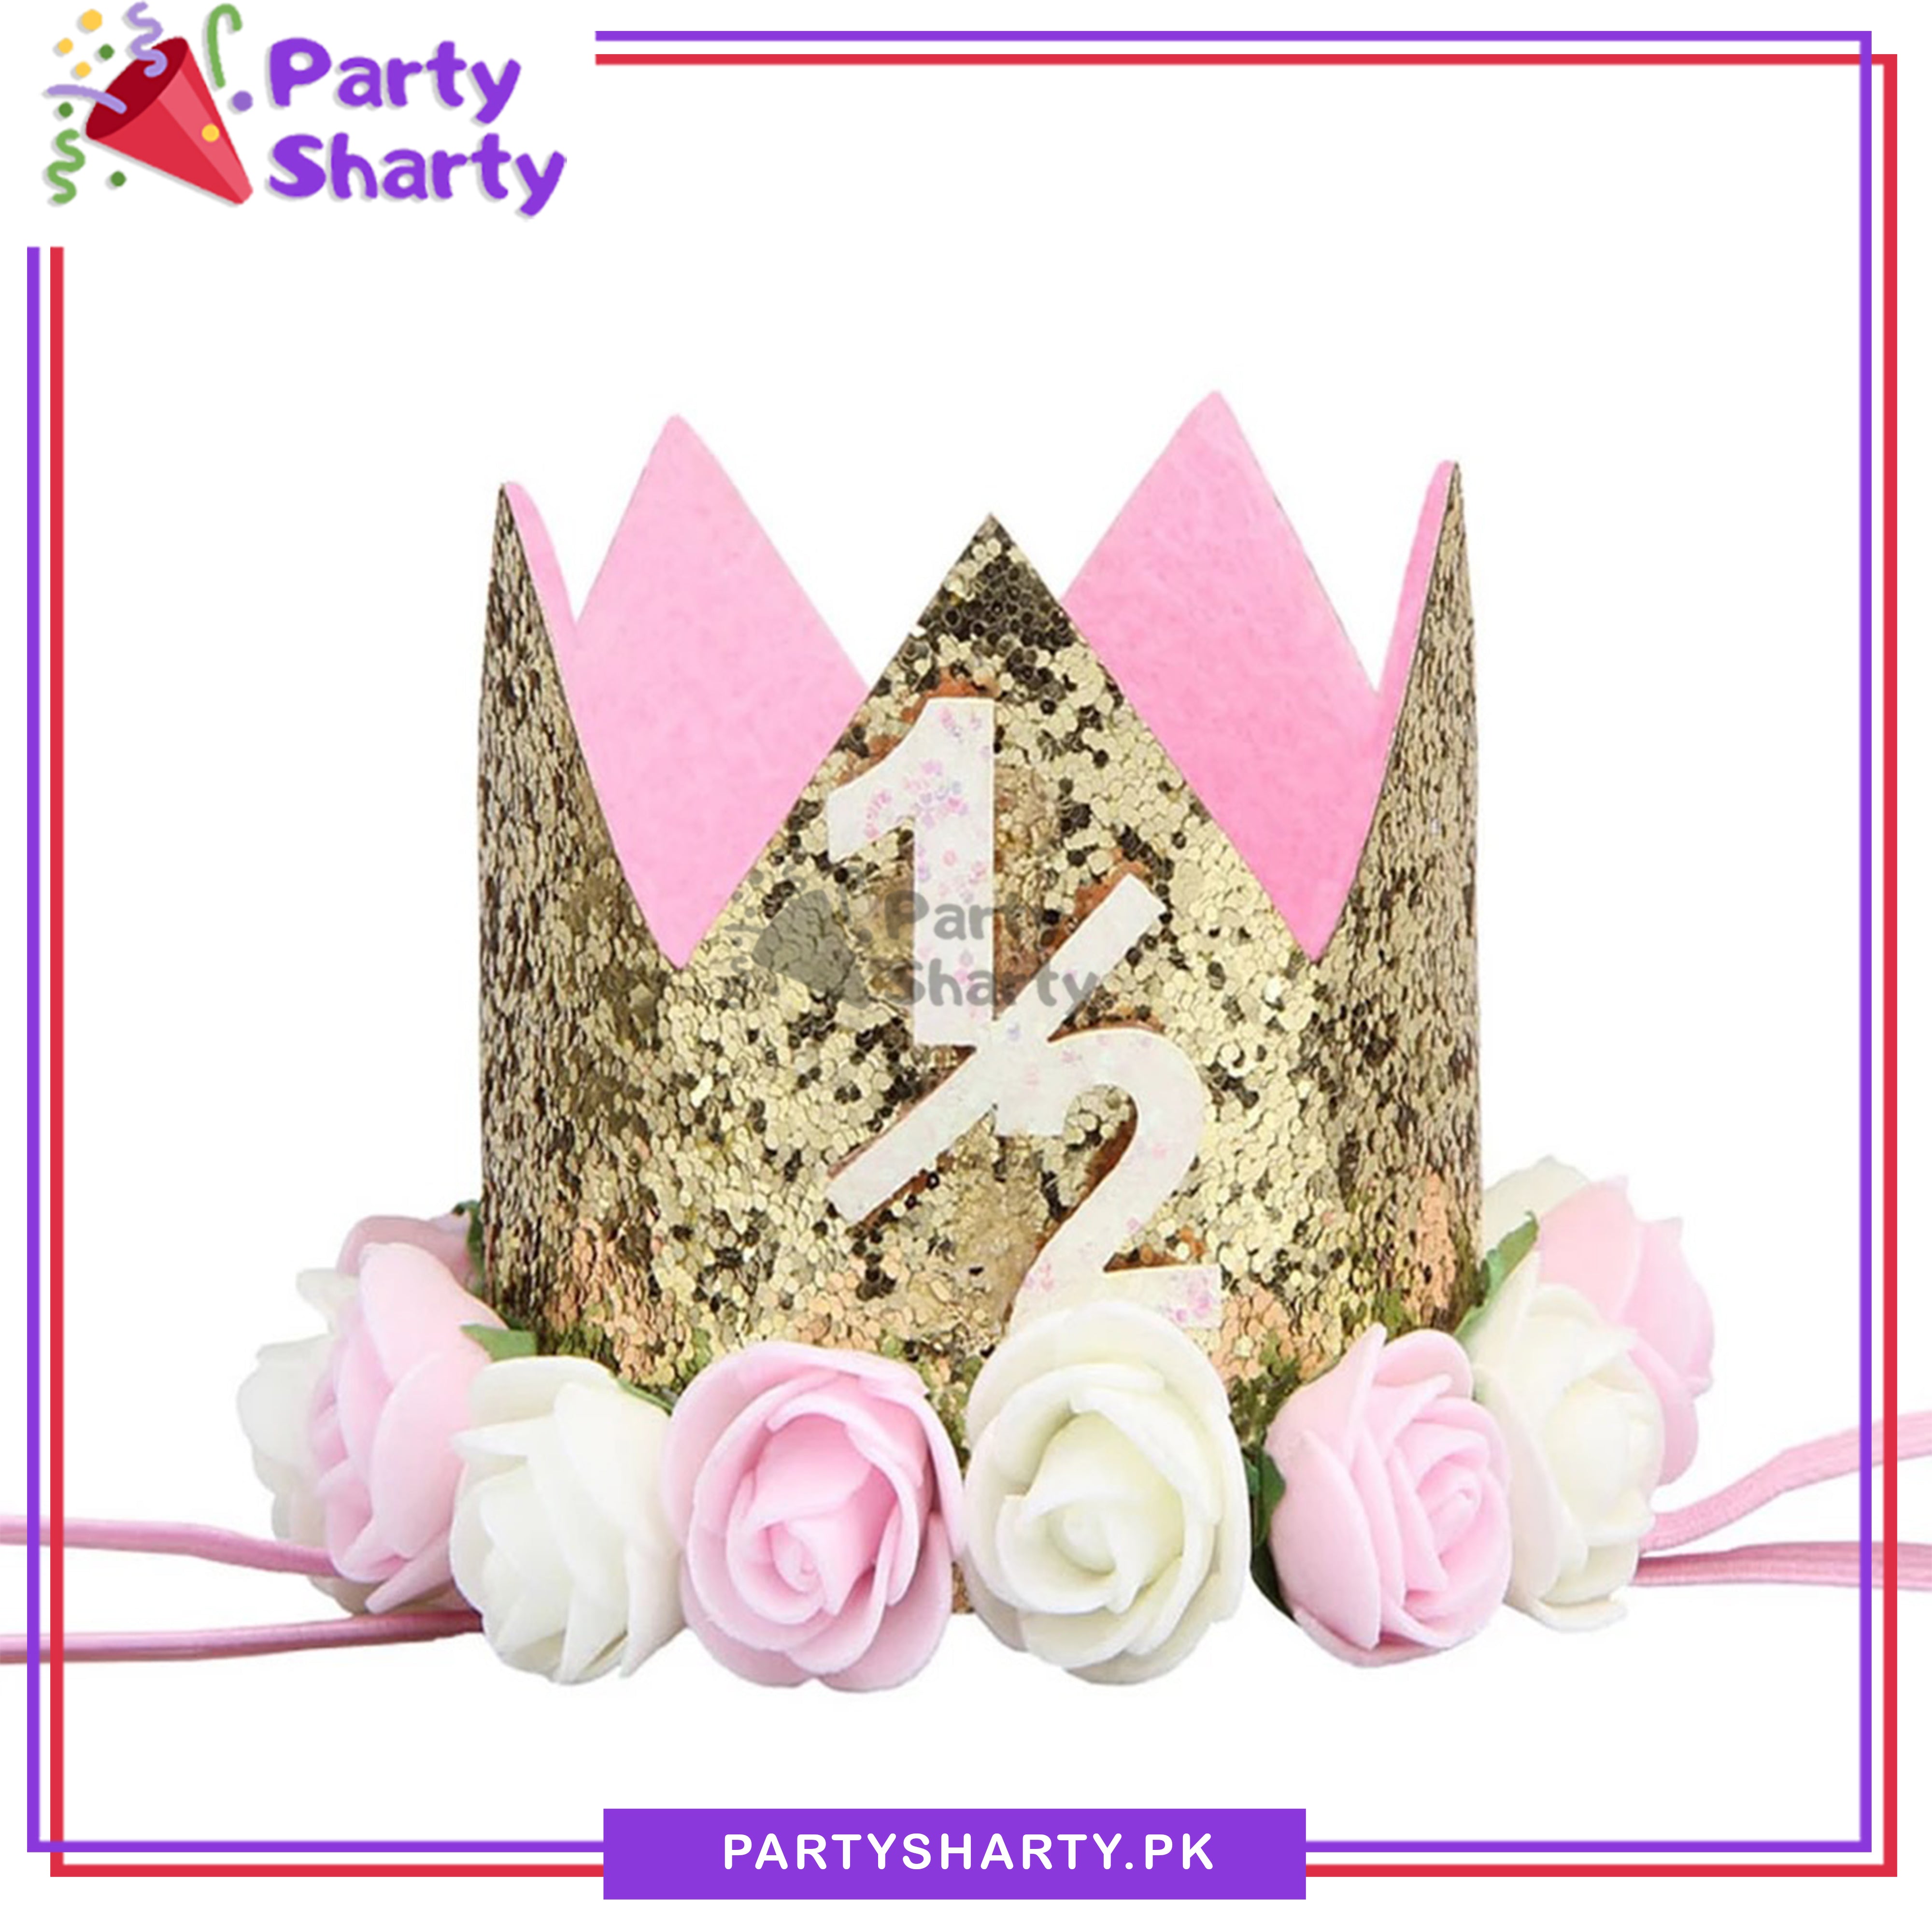 1/2 Birthday Party Cap For 6 Months / Half Birthday Celebration and Decoration